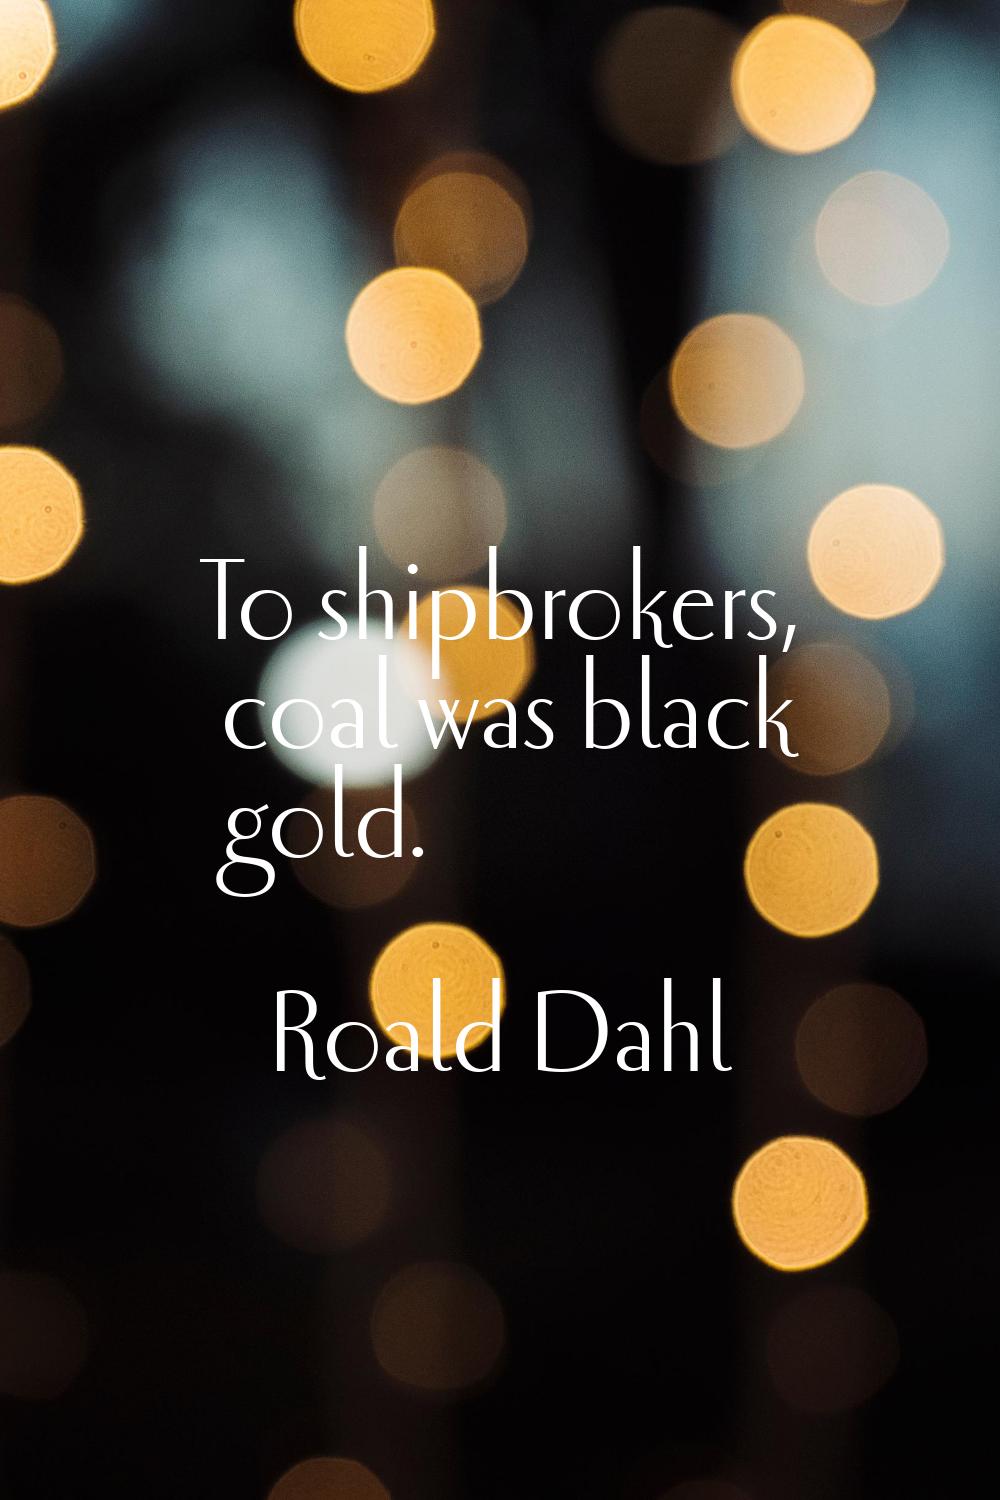 To shipbrokers, coal was black gold.